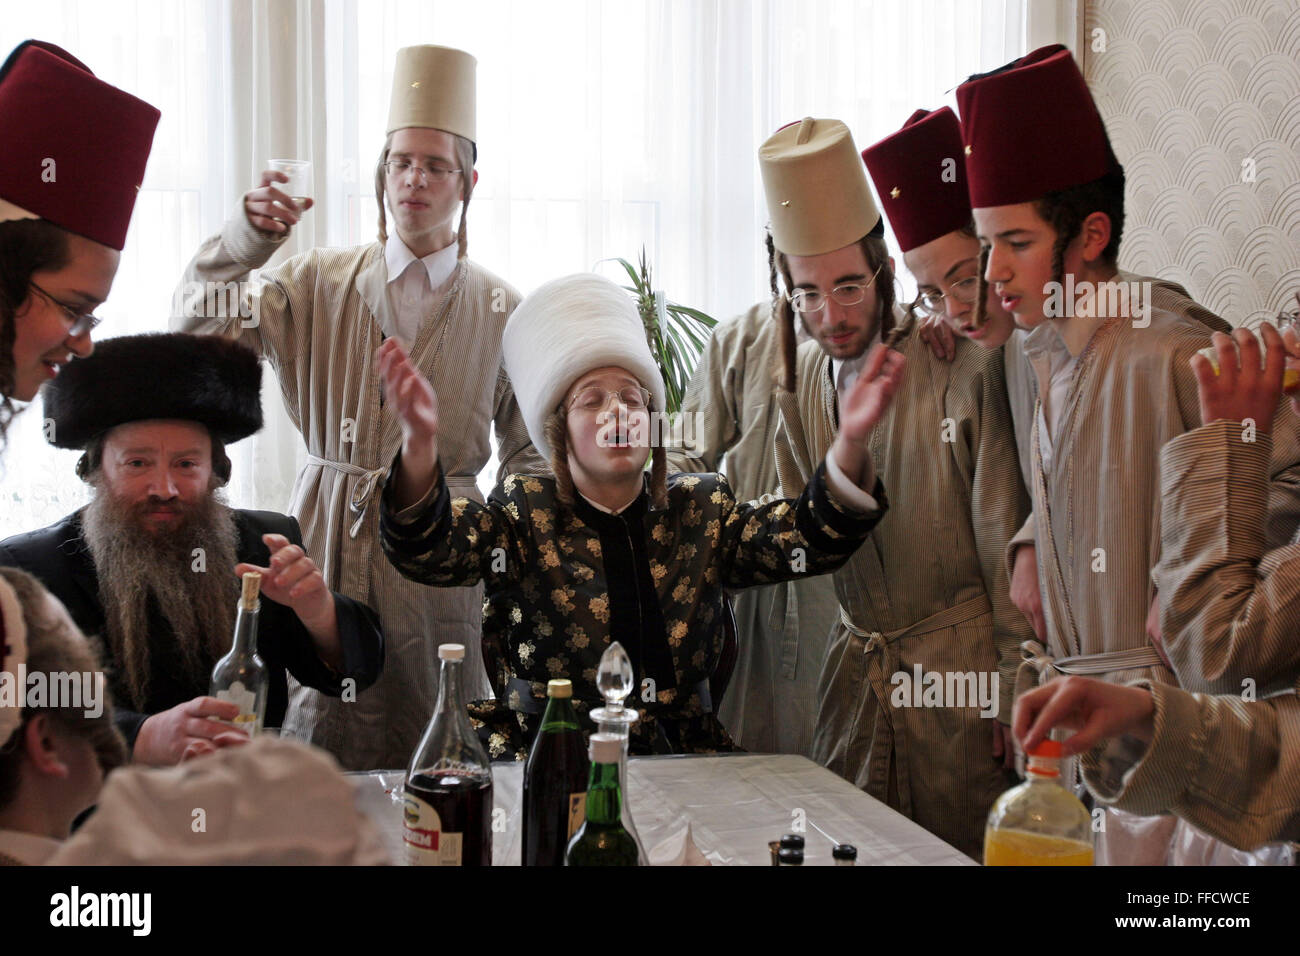 During the Jewish festival of Purim A group of Orthodox Jewish boys from the Viznitz Yeshiva (school) in fancy dress visit local businessmen to collect money for their school. The Purim Rabbi (centre) leads the group with a song, they drink alcohol at every house they visit during the day. Stock Photo